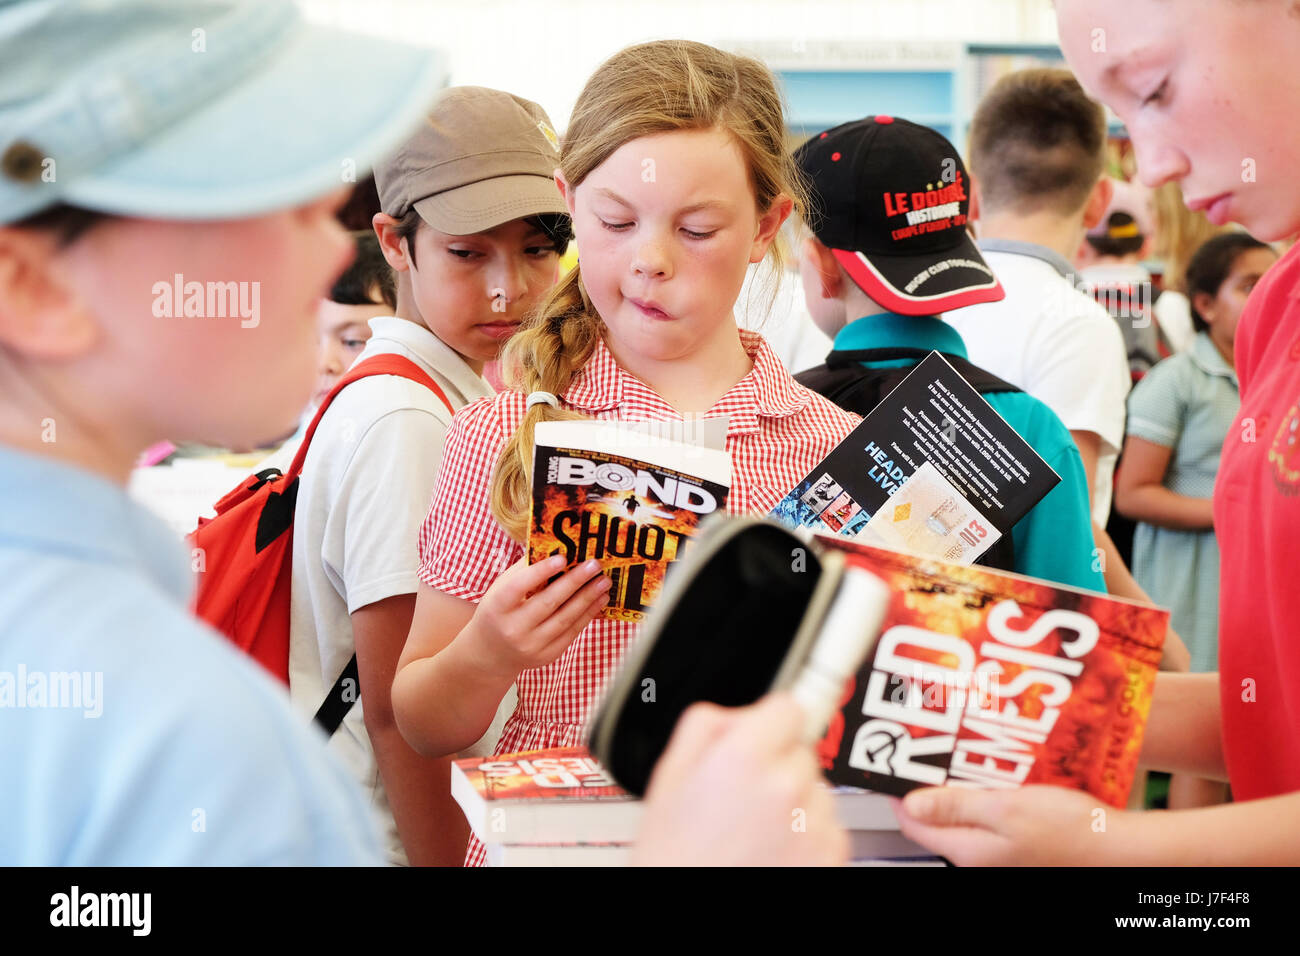 Hay Festival 2017 - Hay on Wye, Wales, UK - May 2017 - Local school children enjoy the  opening day of this years Hay Festival which celebrates its 30th anniversary in 2017. The children shown here are among the 70,000 books on sale in the Festival bookshop.  Credit: Steven May/Alamy Live News Stock Photo